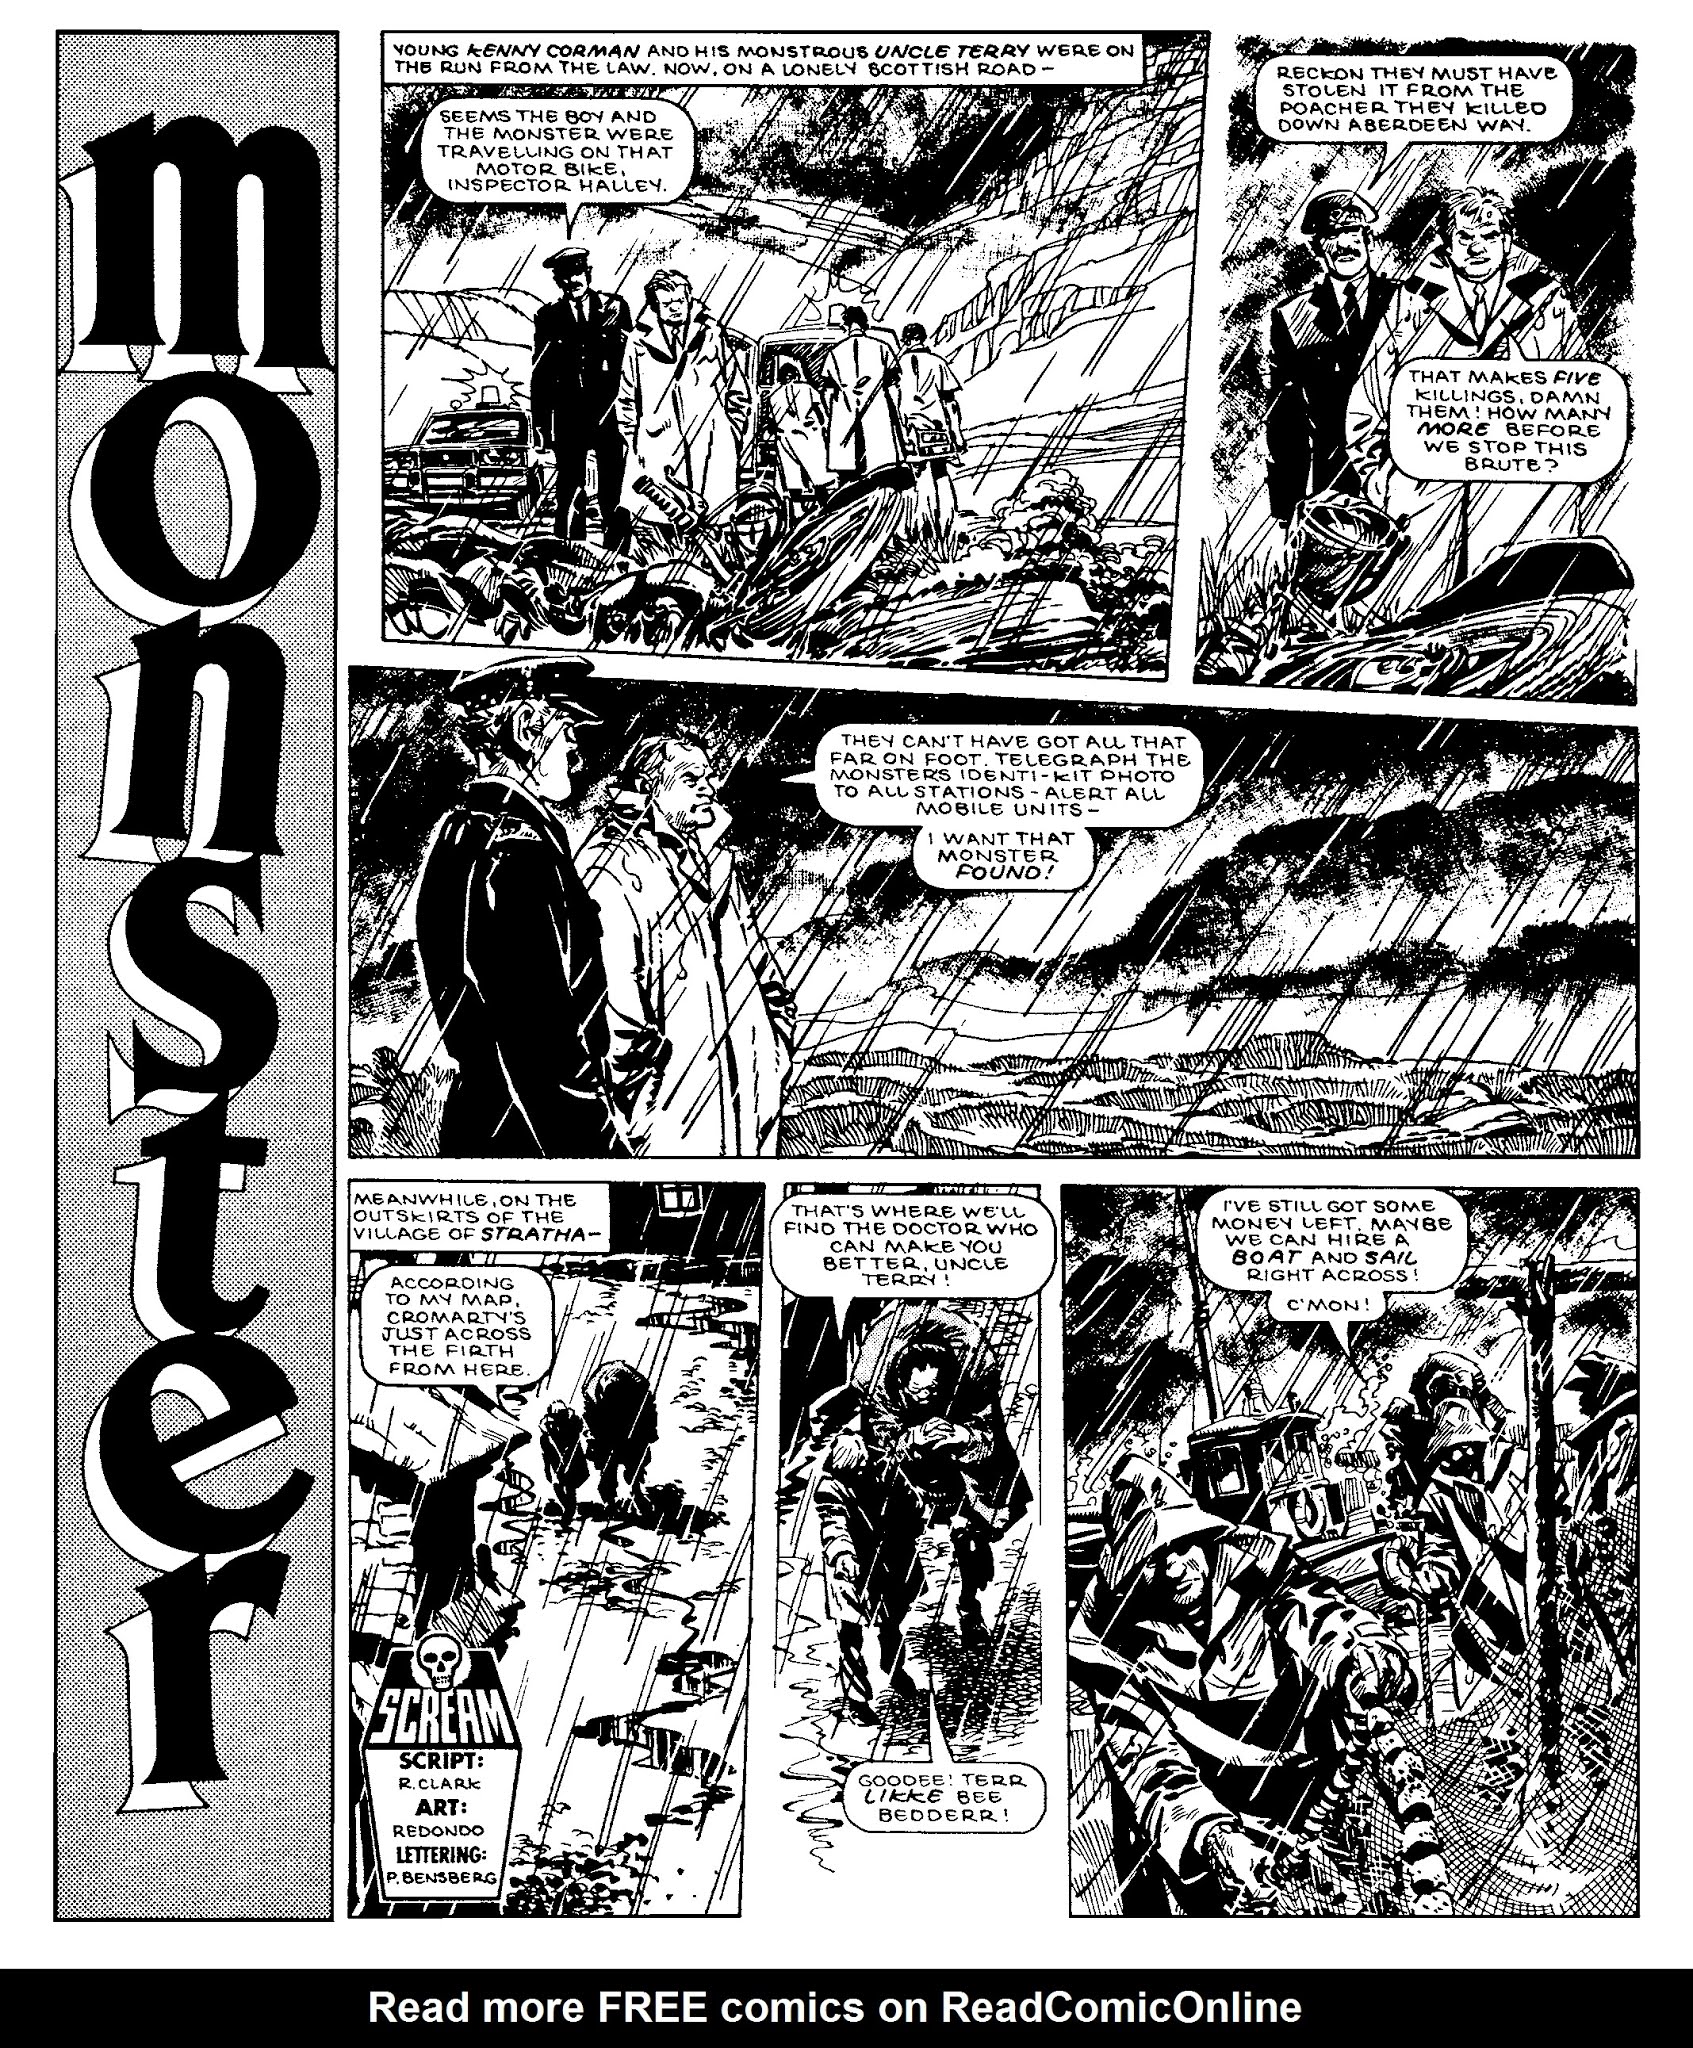 Read online Monster comic -  Issue # TPB (Part 1) - 63